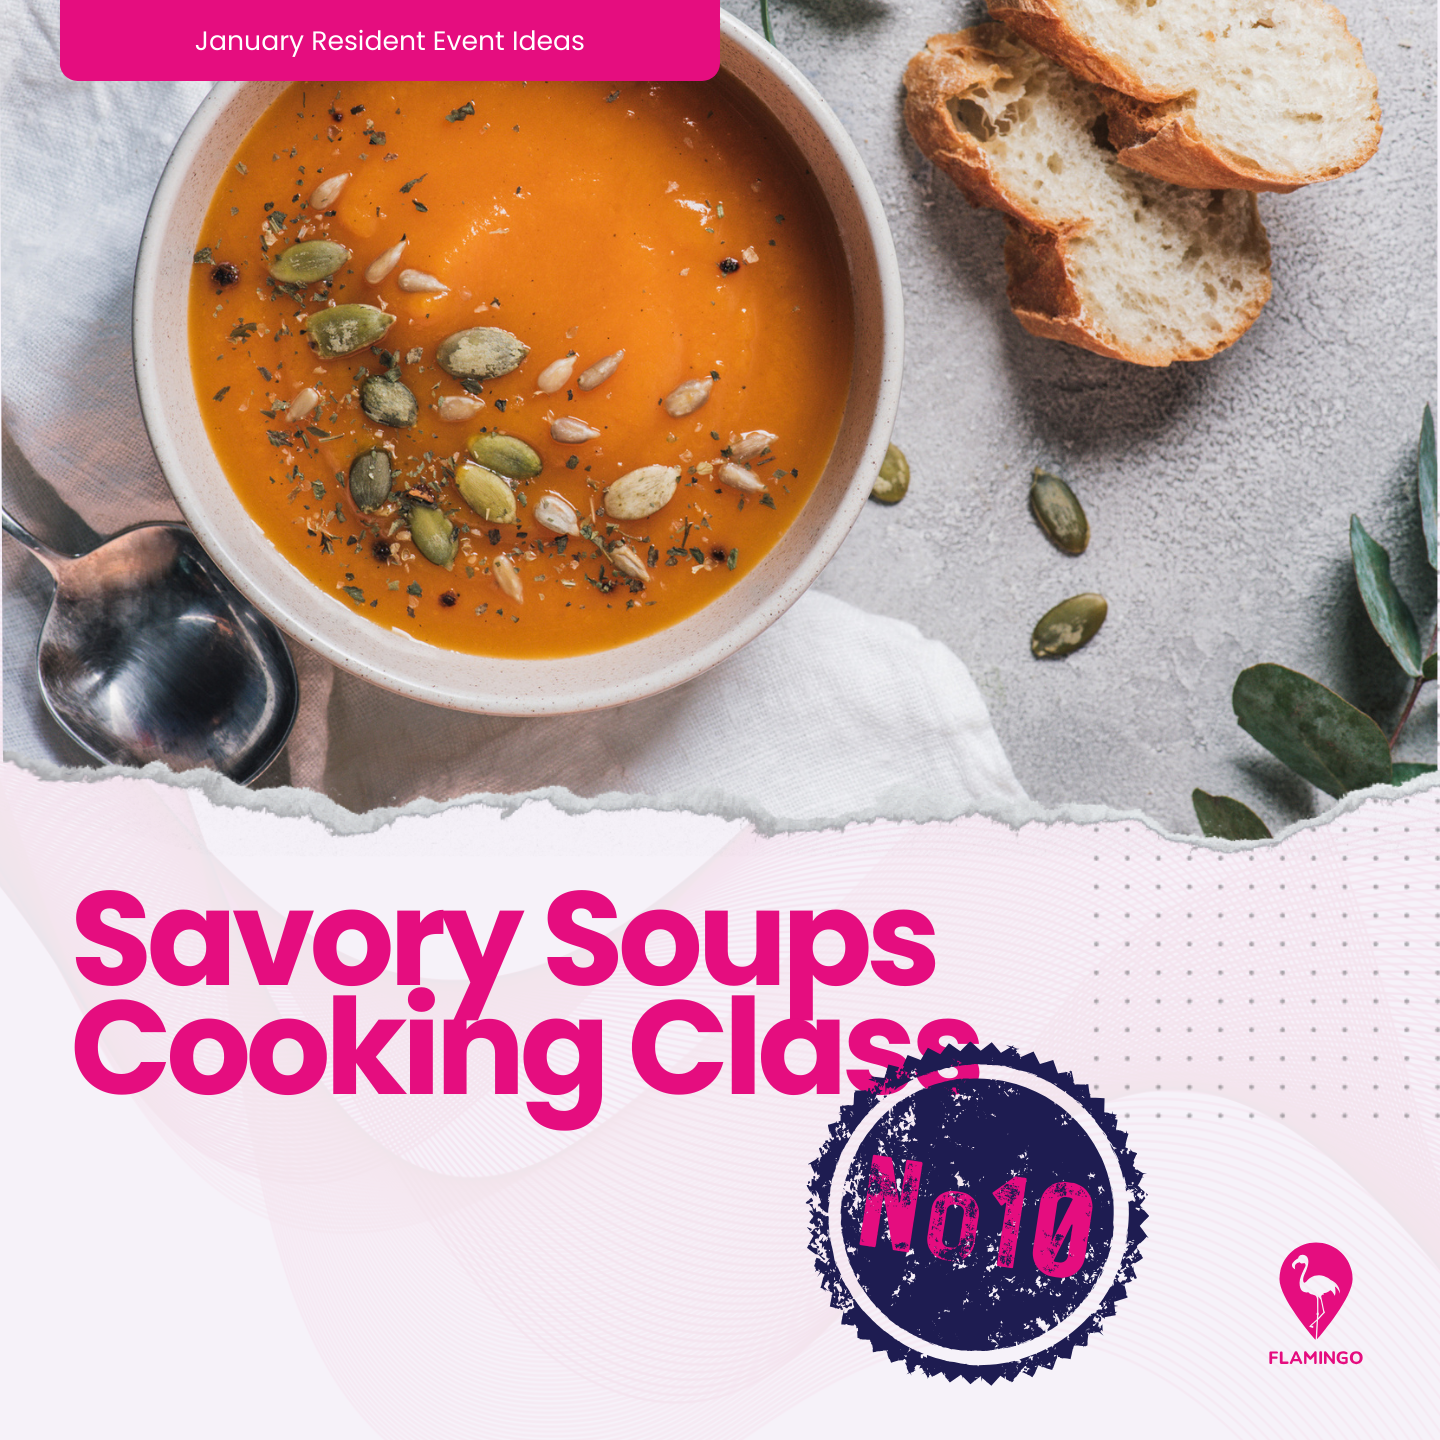 Savory Soups Cooking Class | January Resident Event Ideas